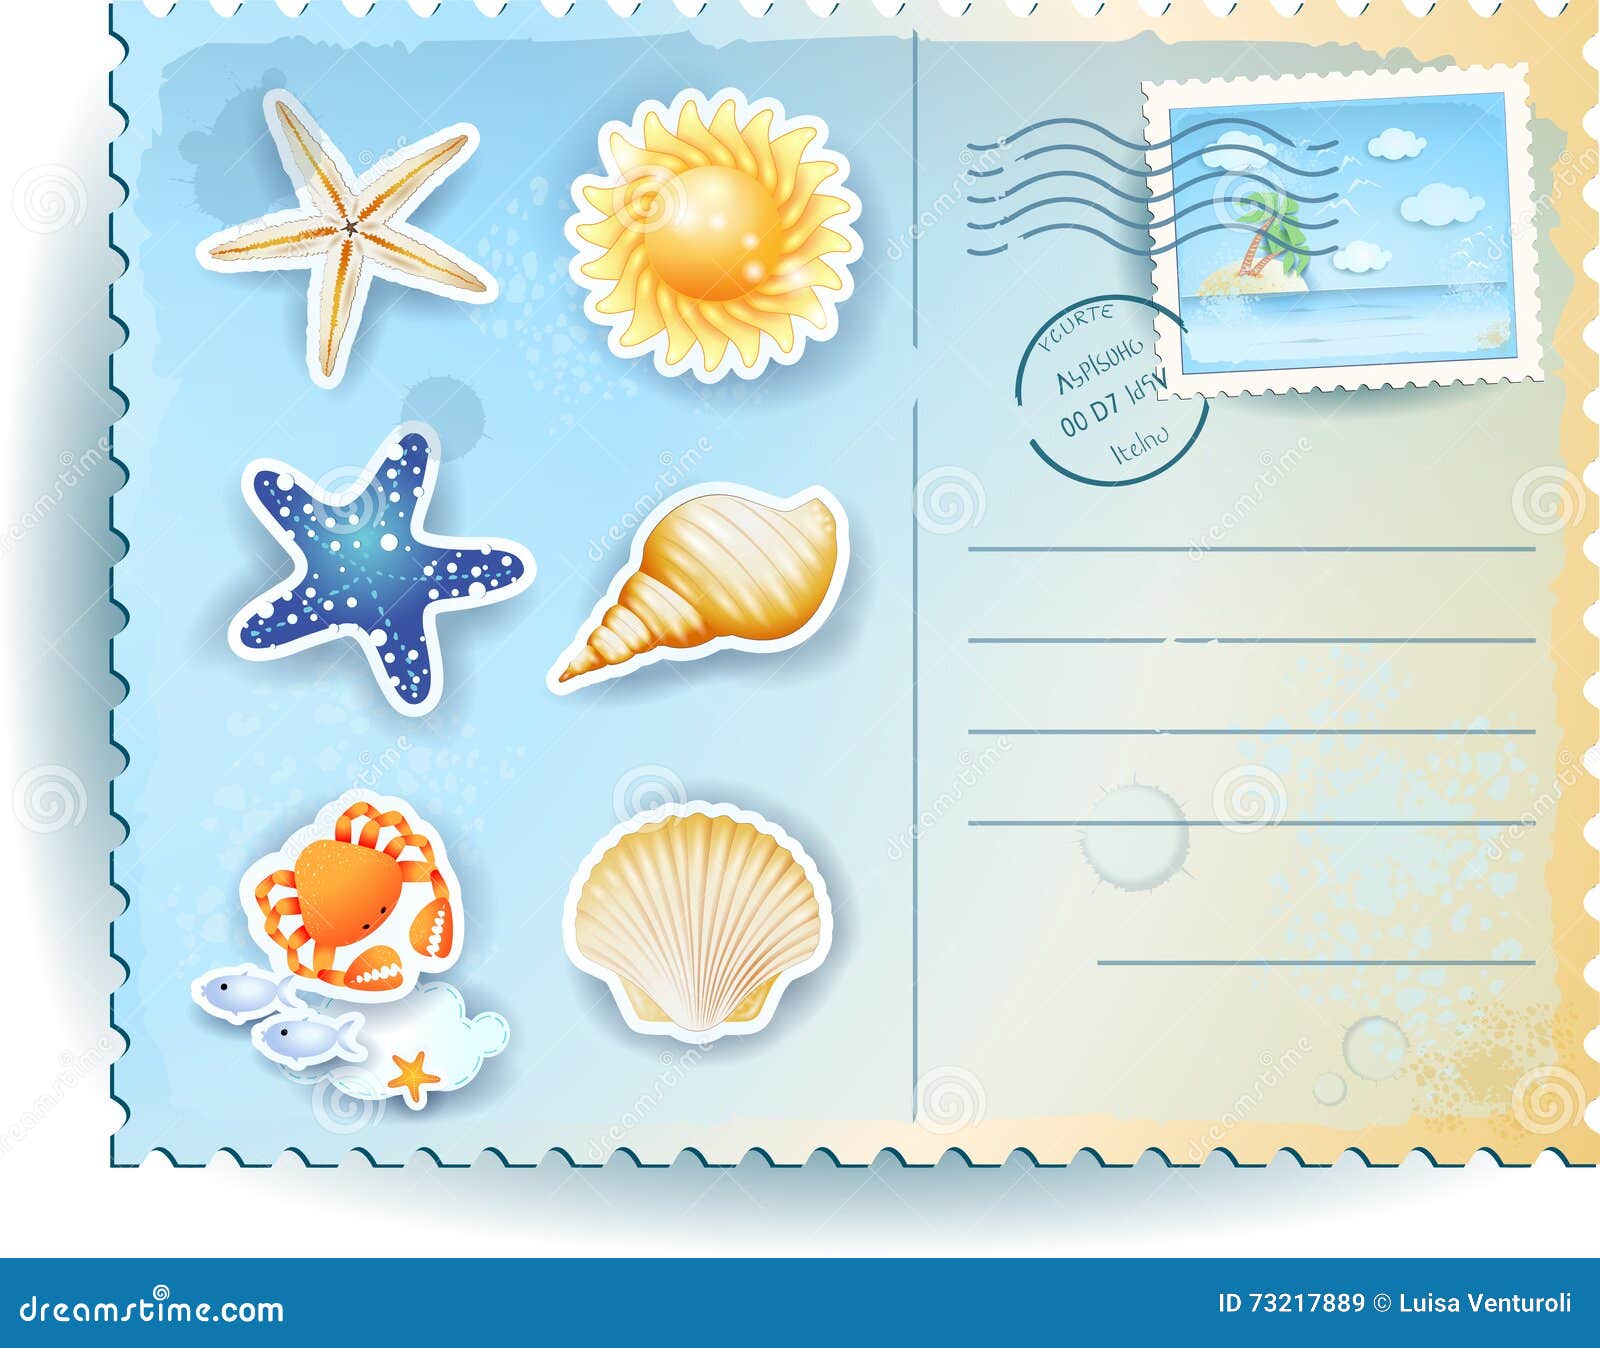 summer postcard with icons